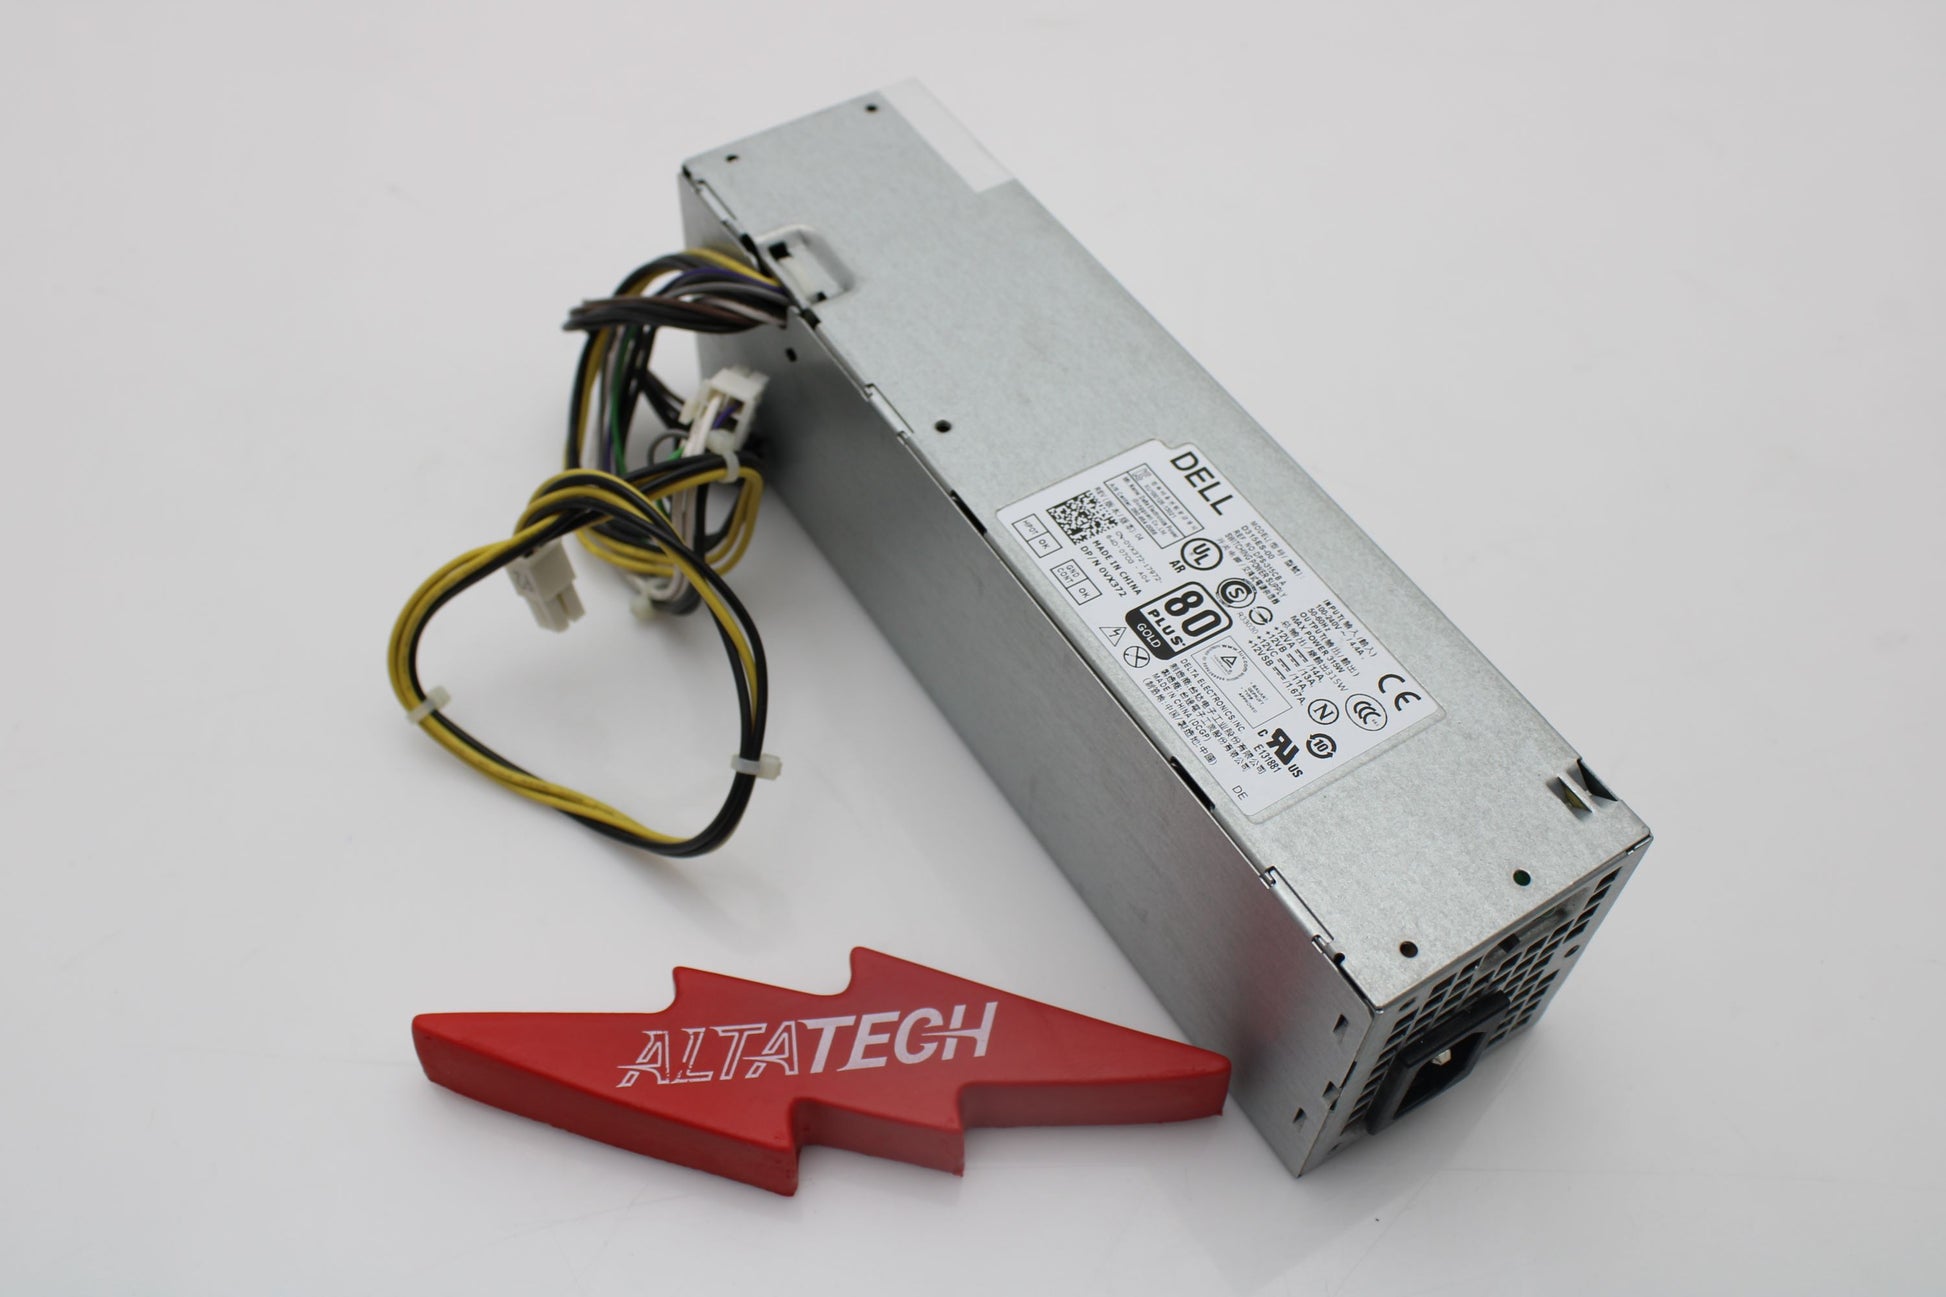 Dell 0VX372 OptiPlex 315W Power Supply for XE2 SFF Desktop, Used